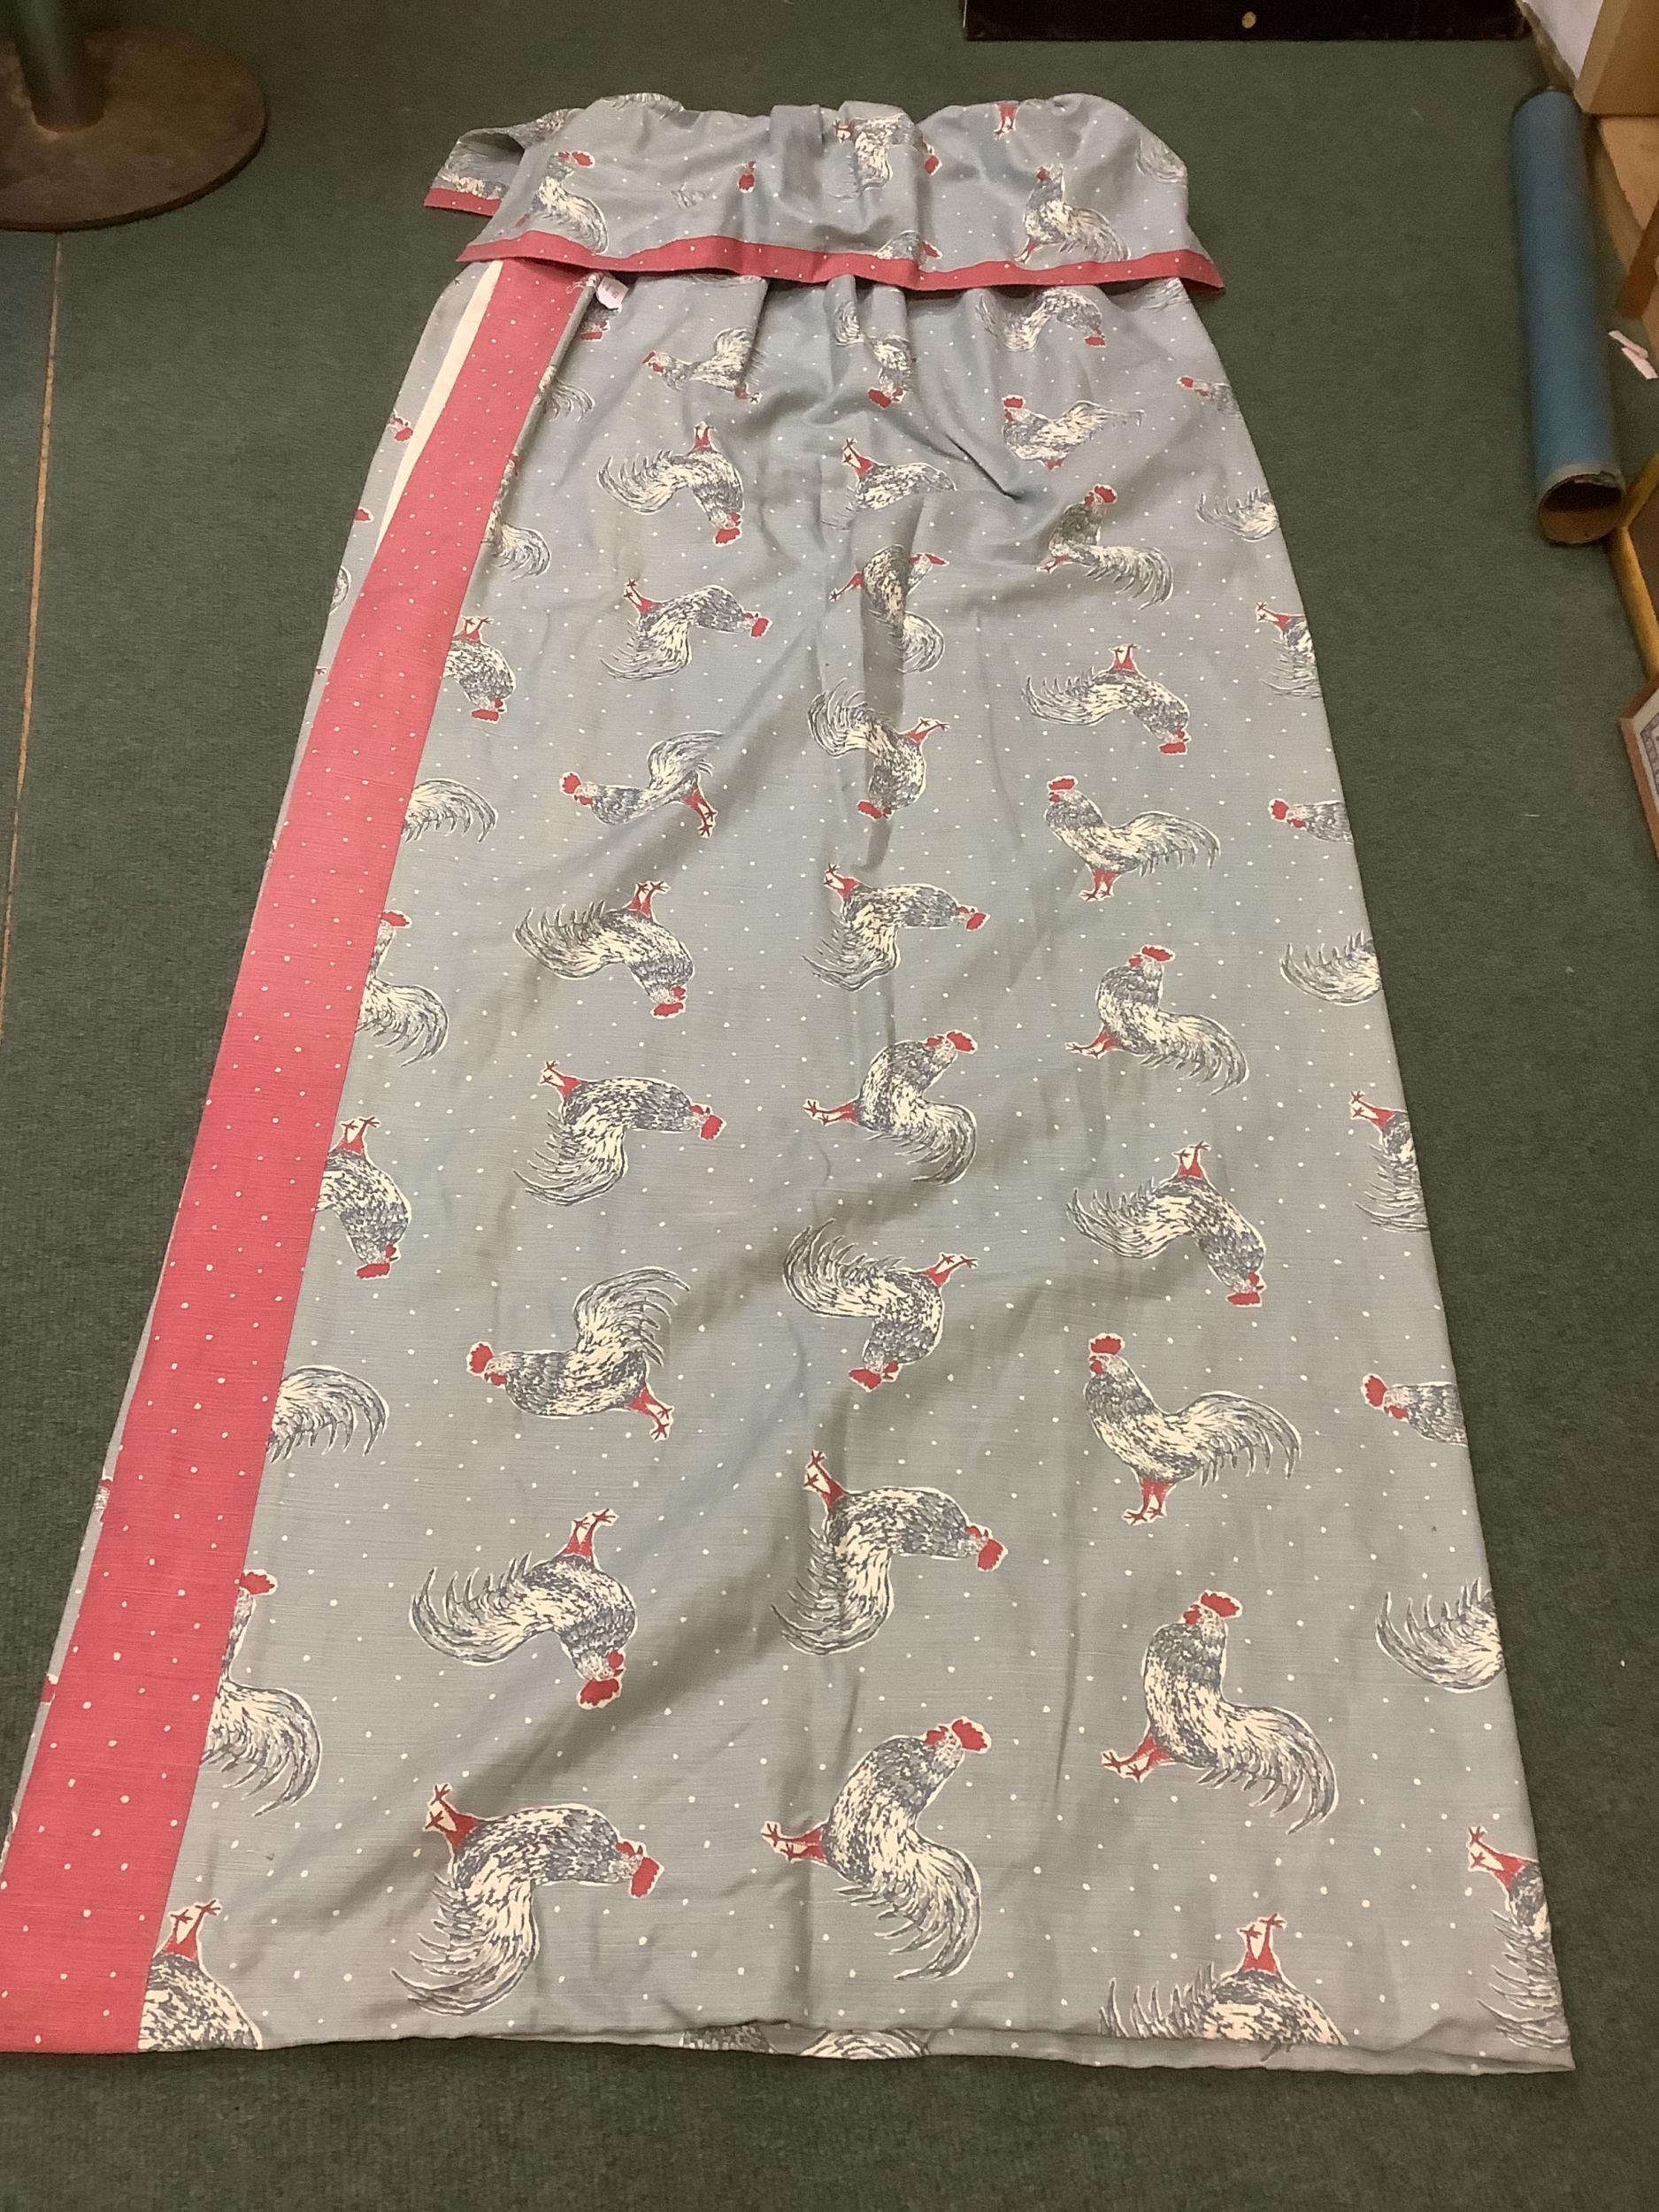 Pair of lined and interlined curtains, grey blue fabric with all over Chicken design, red spot